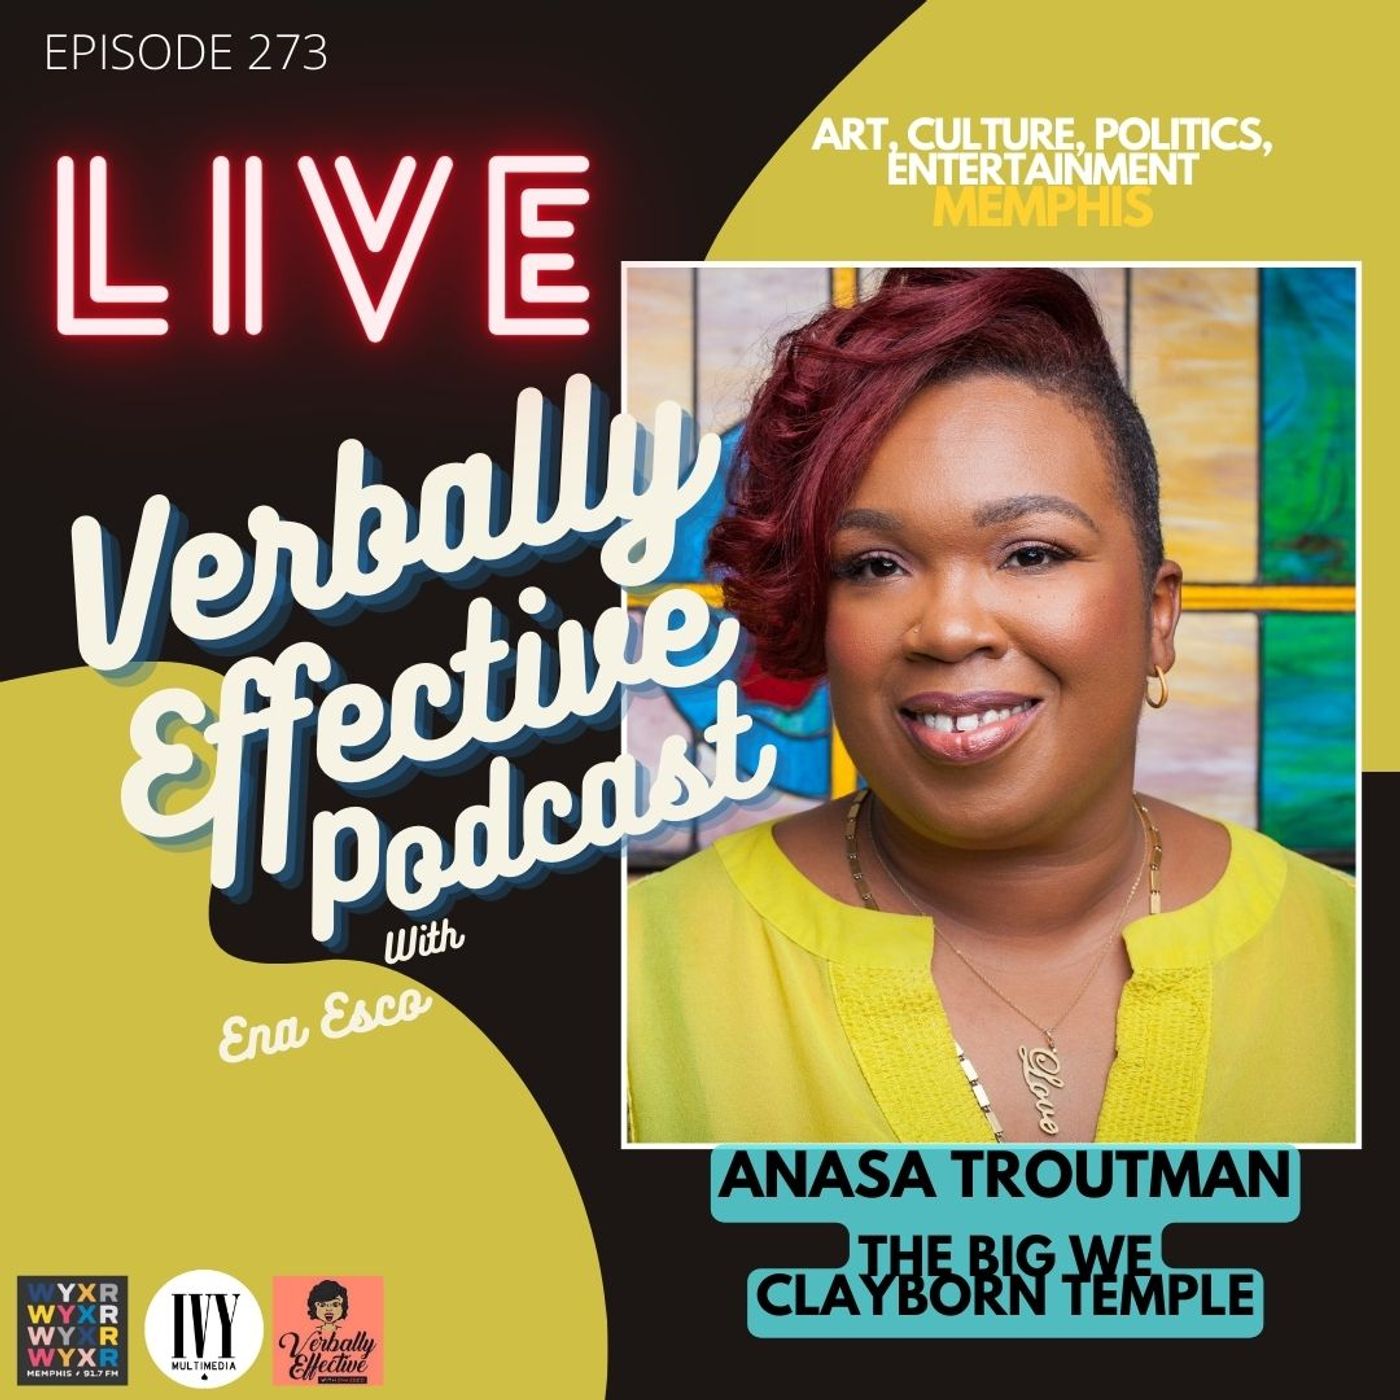 ANASA TROUTMAN "LEAD WITH LOVE" | EPISODE 273